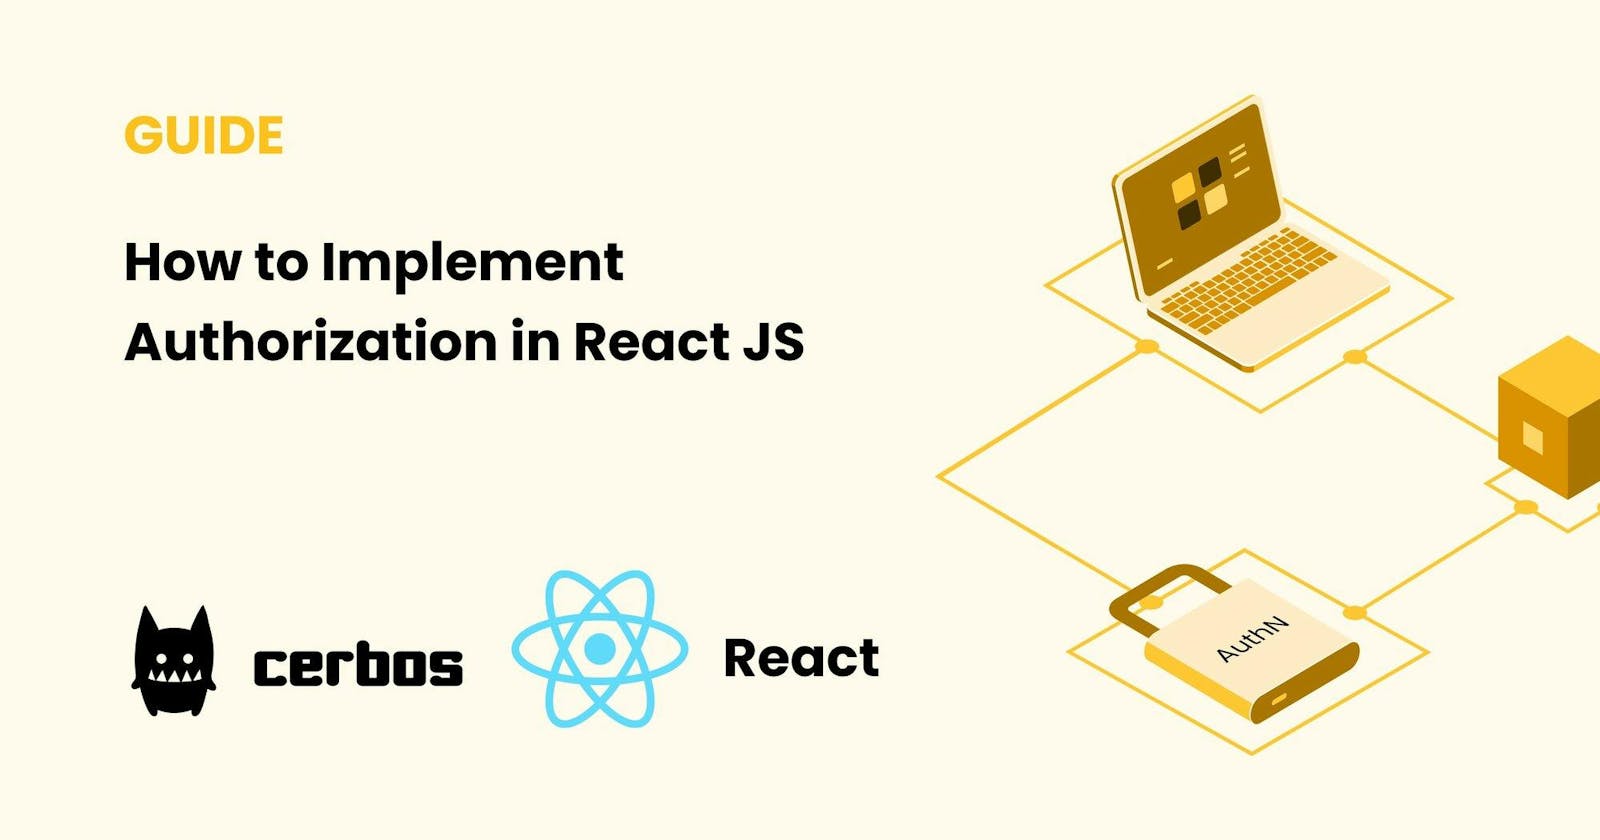 How to Implement Authorization in React JS